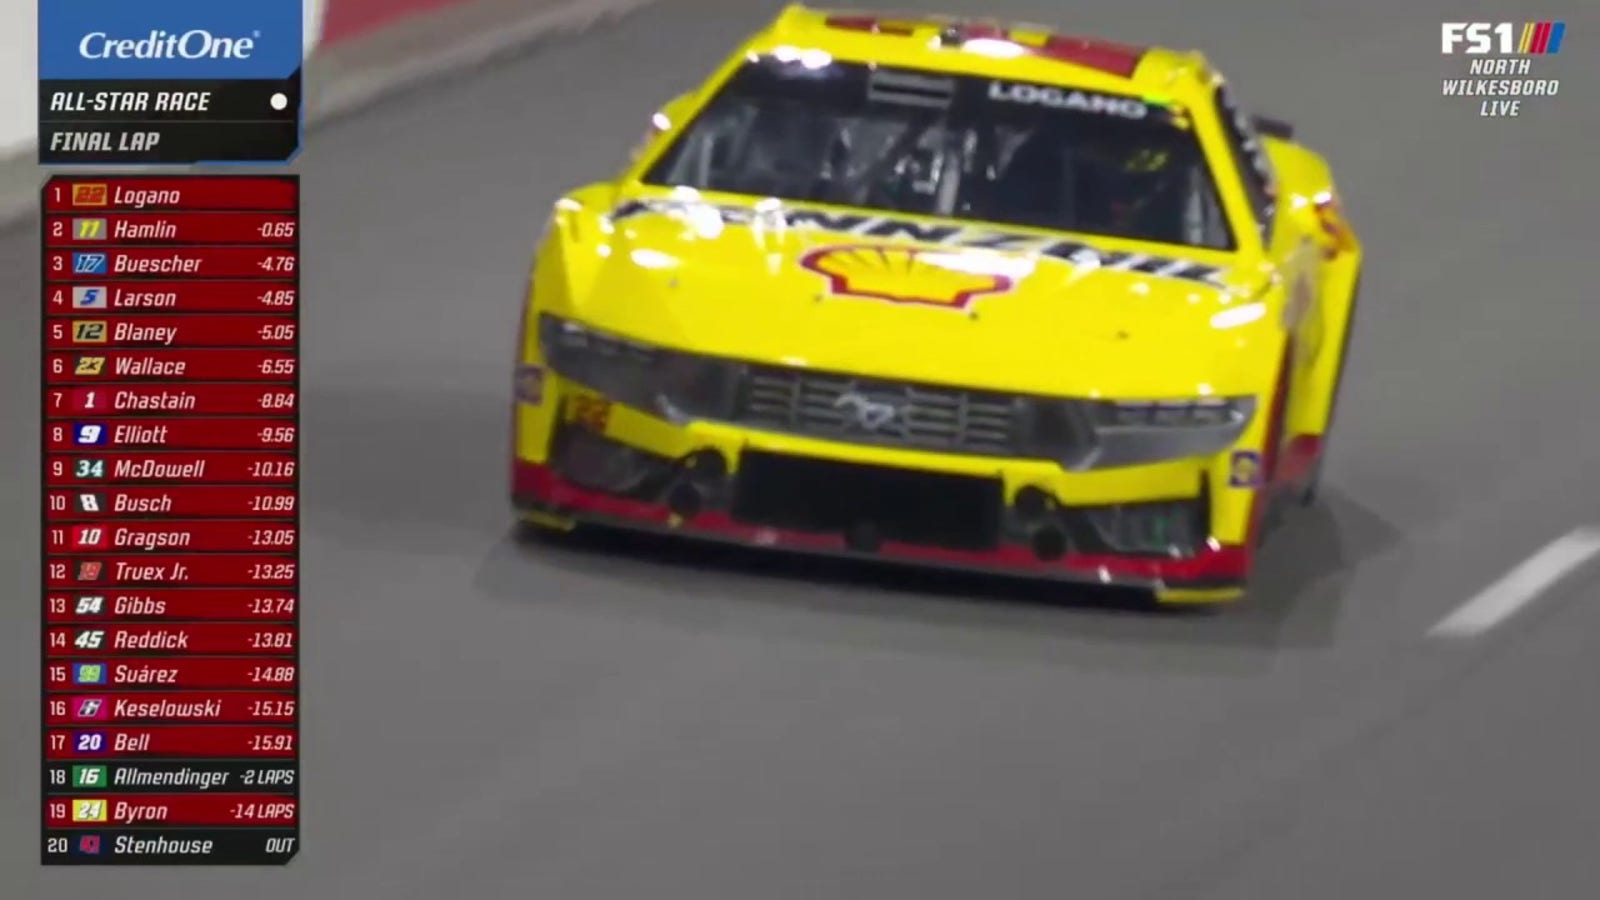 FINAL LAPS: Joey Logano earns the checkered flag at North Wilkesboro Speedway in NASCAR All-Star Race